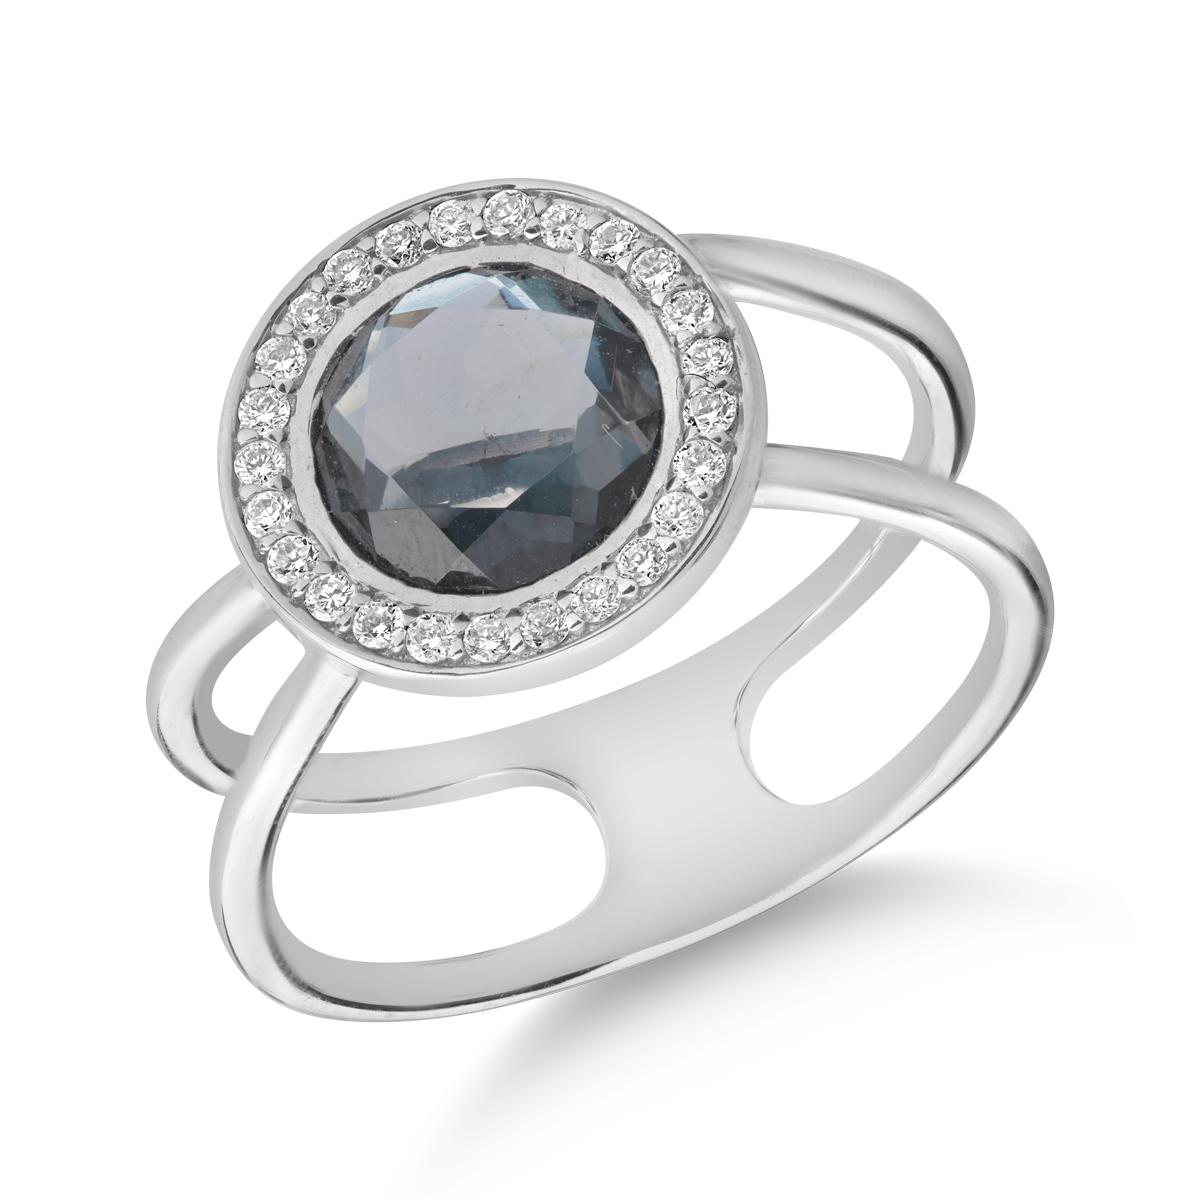 18K white gold ring with 1.68ct London blue topaz and 0.156ct diamonds